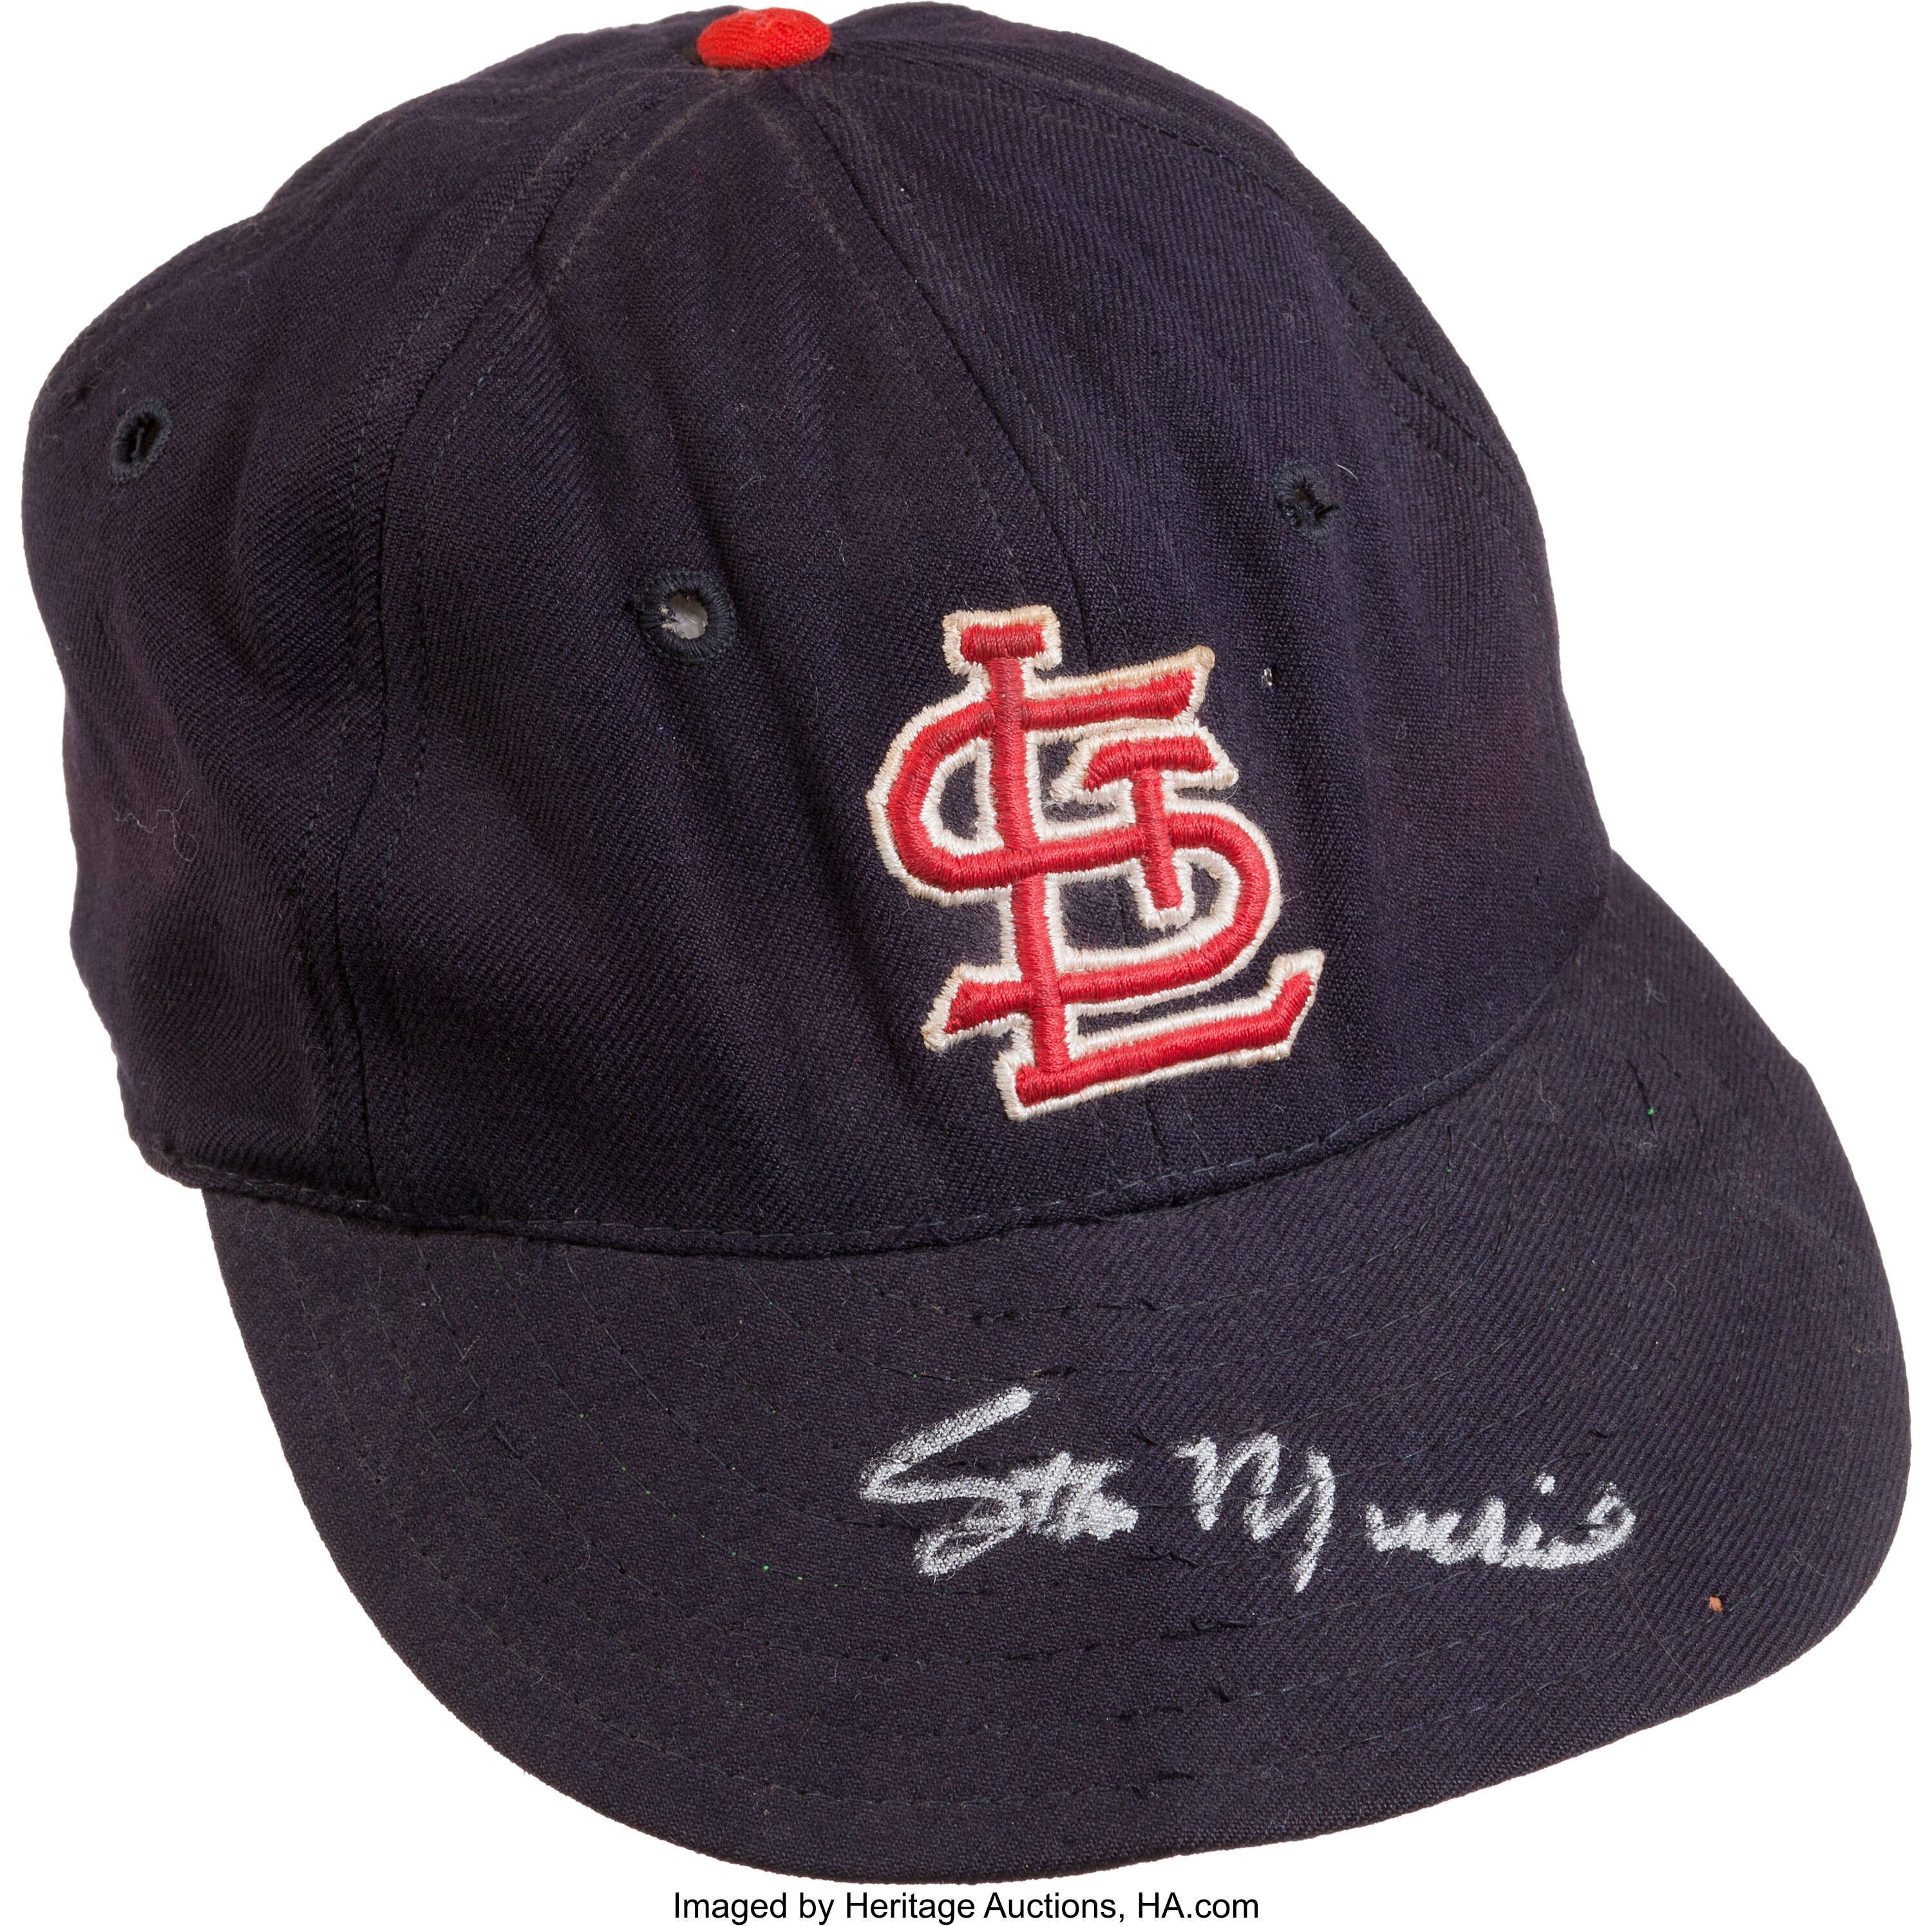 St. Louis Cardinals: Stan Musial's time in the Navy